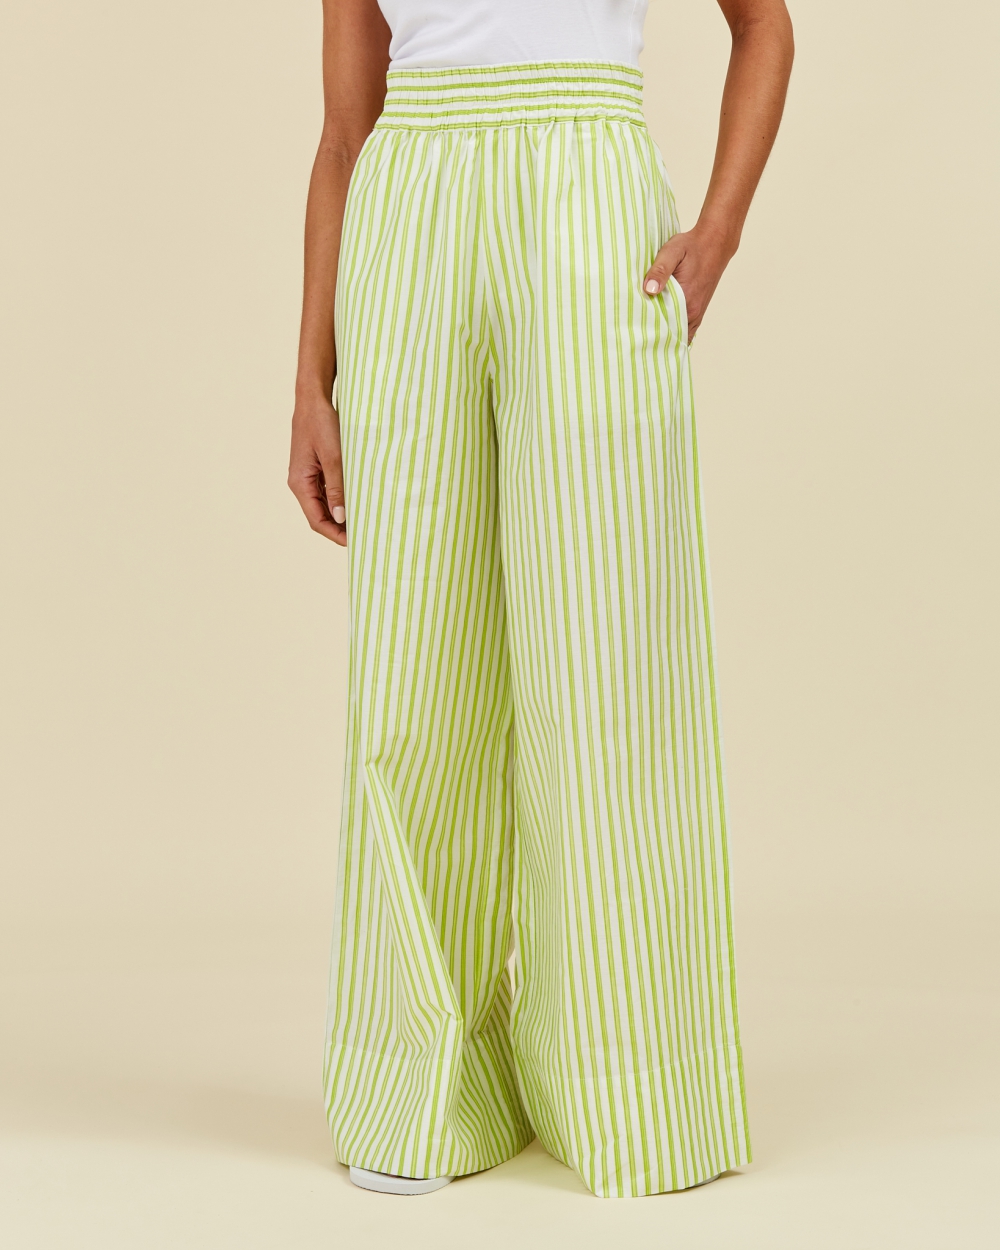 https://www.seamehappy.be/wp-content/uploads/2023/01/Sea-Me-Happy-Andrea-Pants-stripes-lime-front2-1.jpg